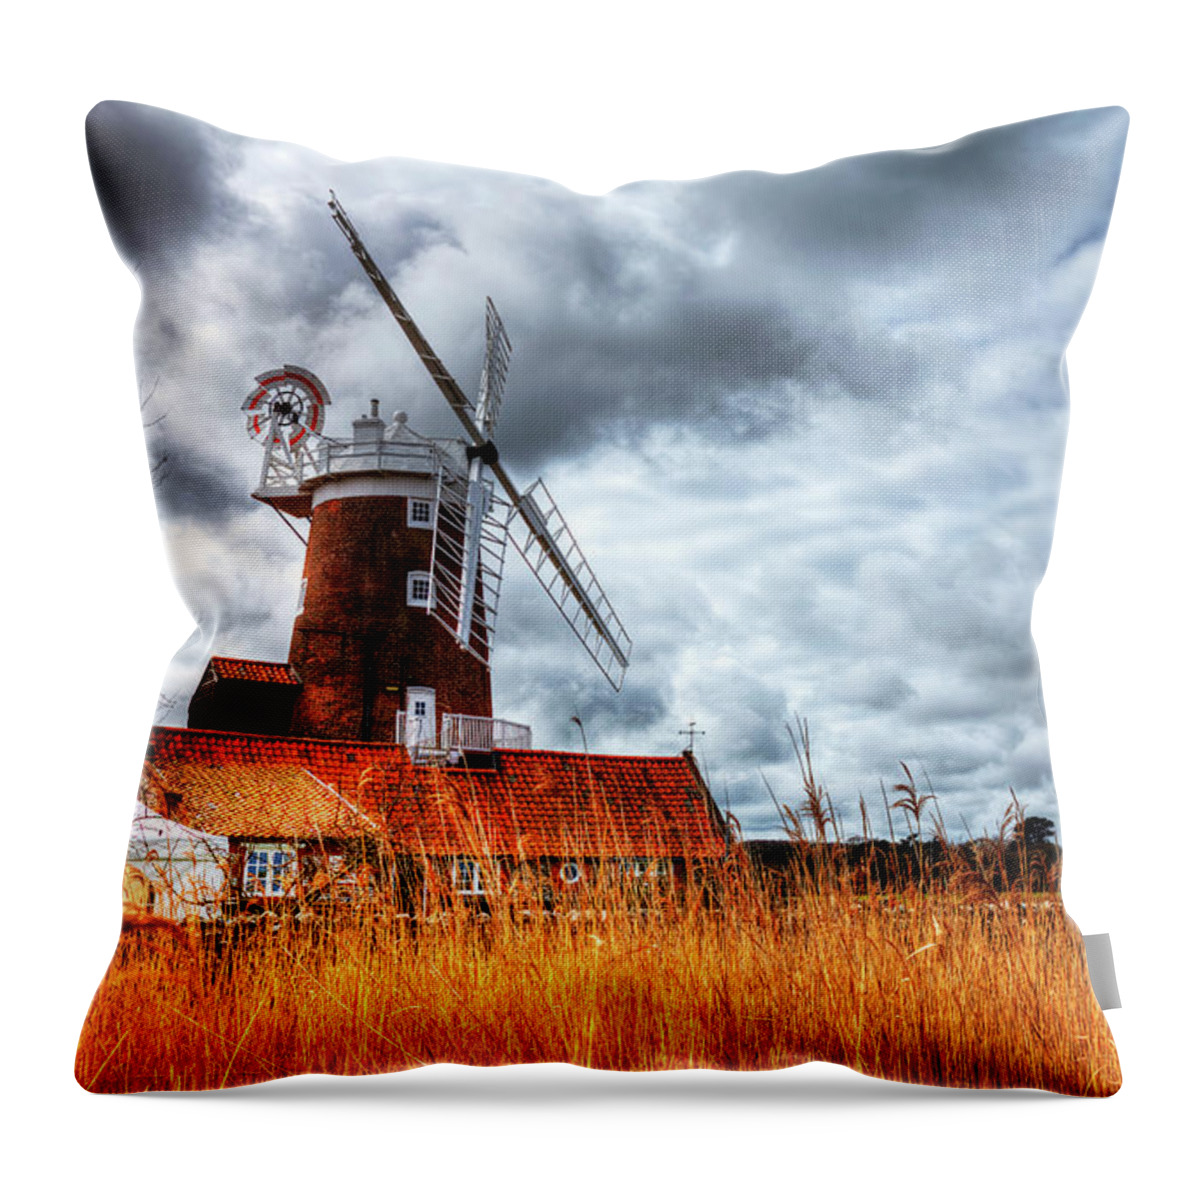 Windmill Throw Pillow featuring the photograph Norfolk Windmill by Paul Thompson